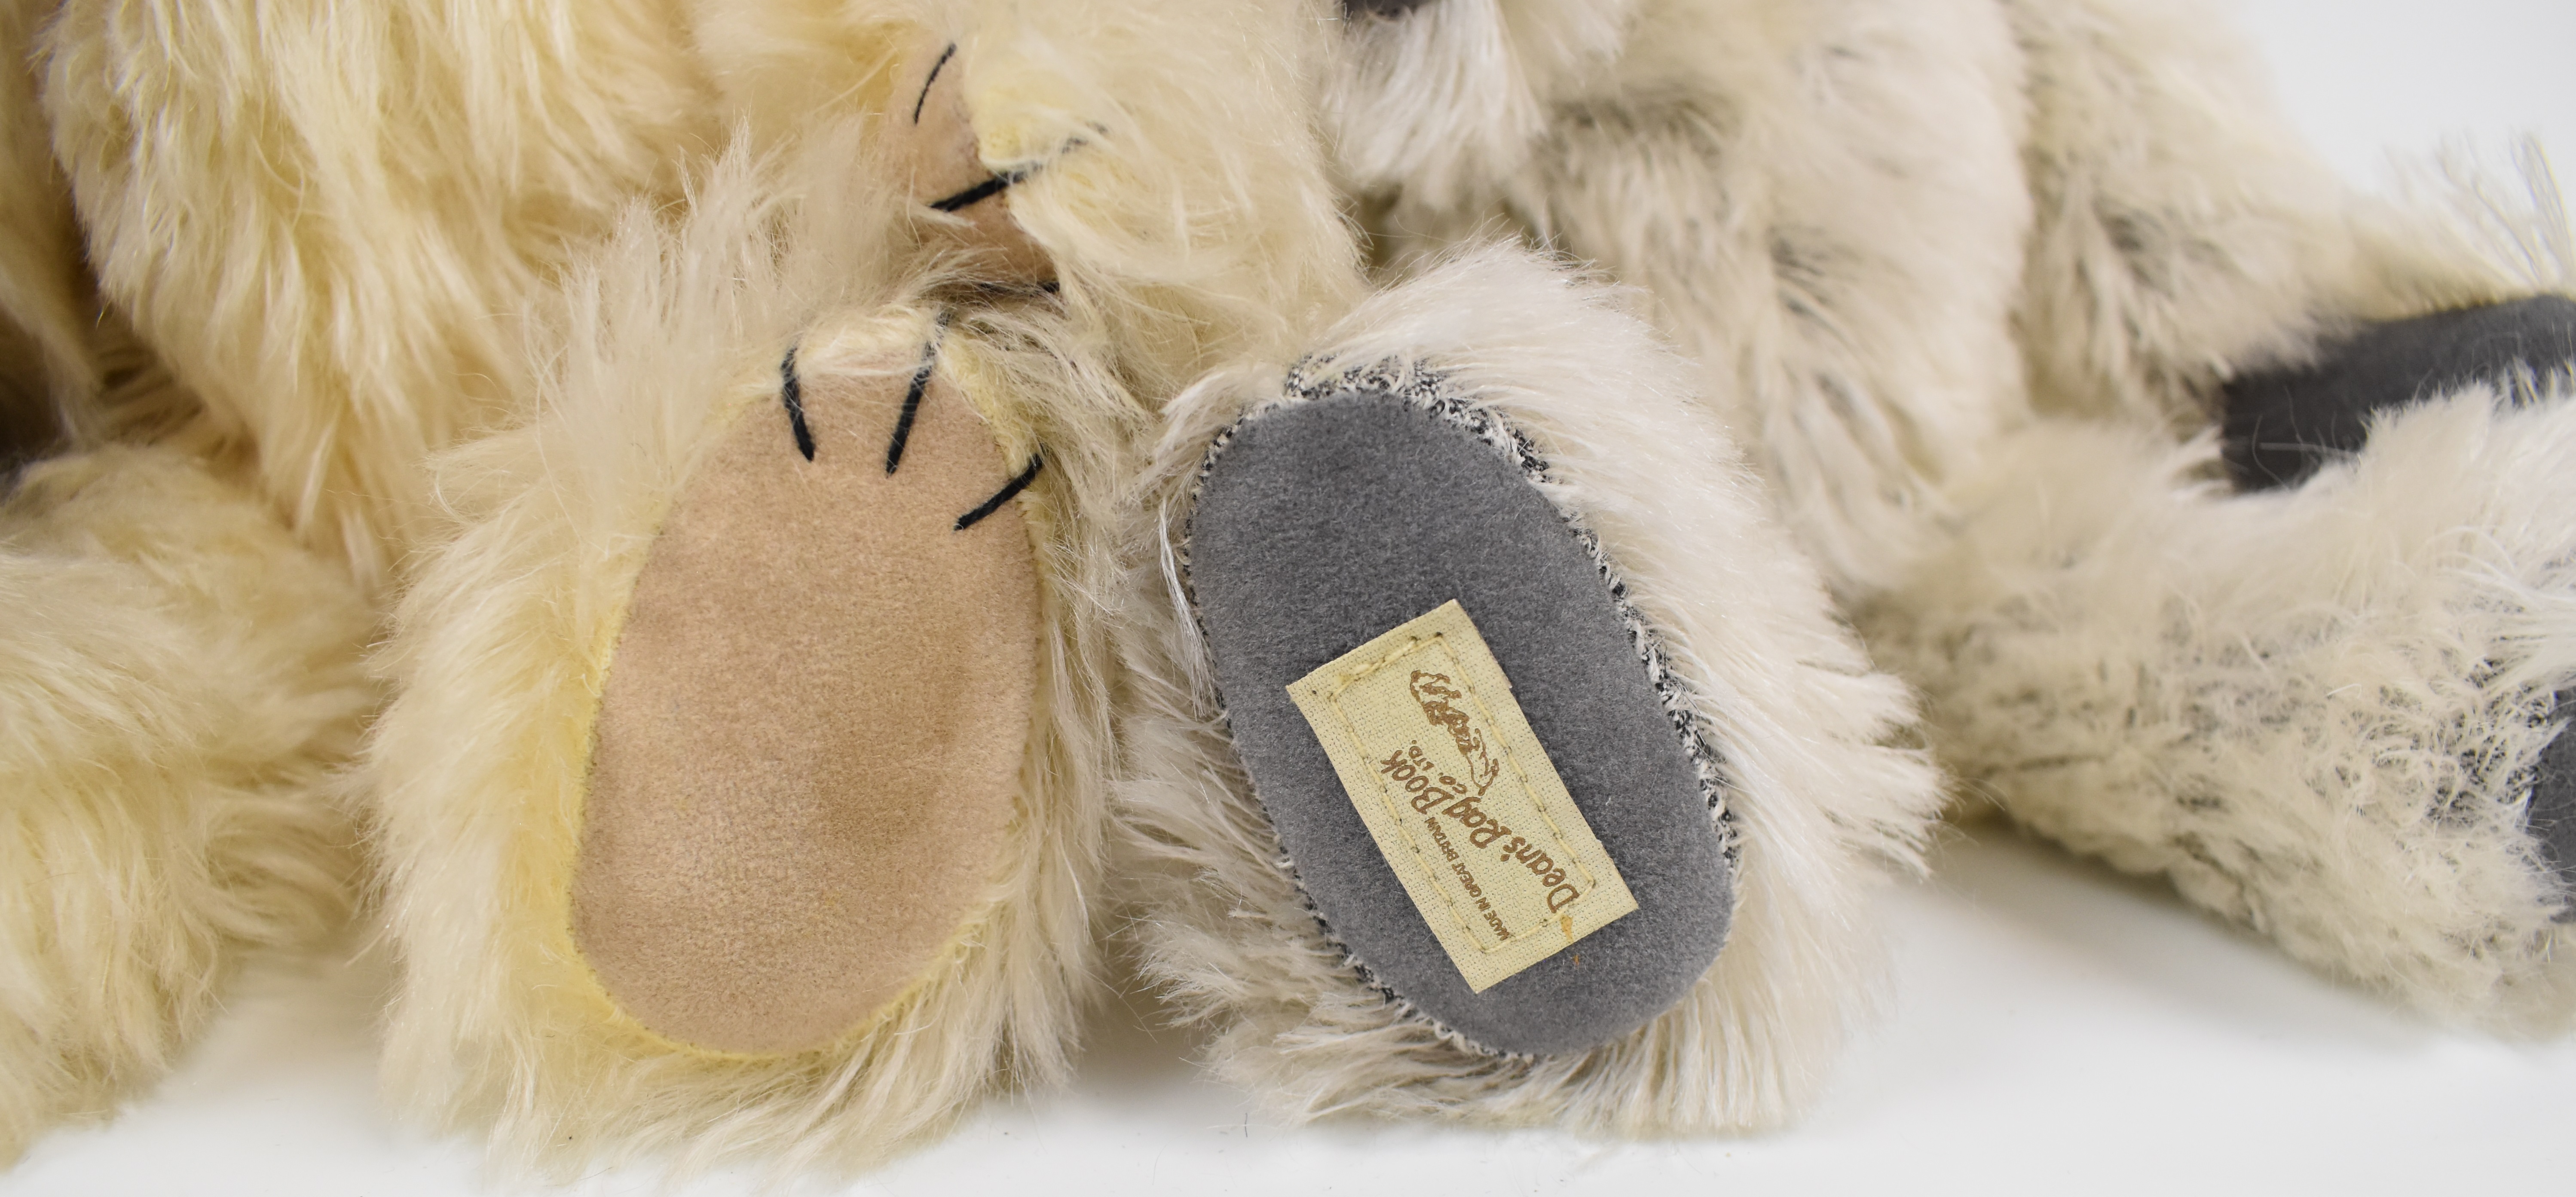 Thirteen Deans Rag Book limited edition Teddy bears, most with original tags and labels to include - Bild 4 aus 12